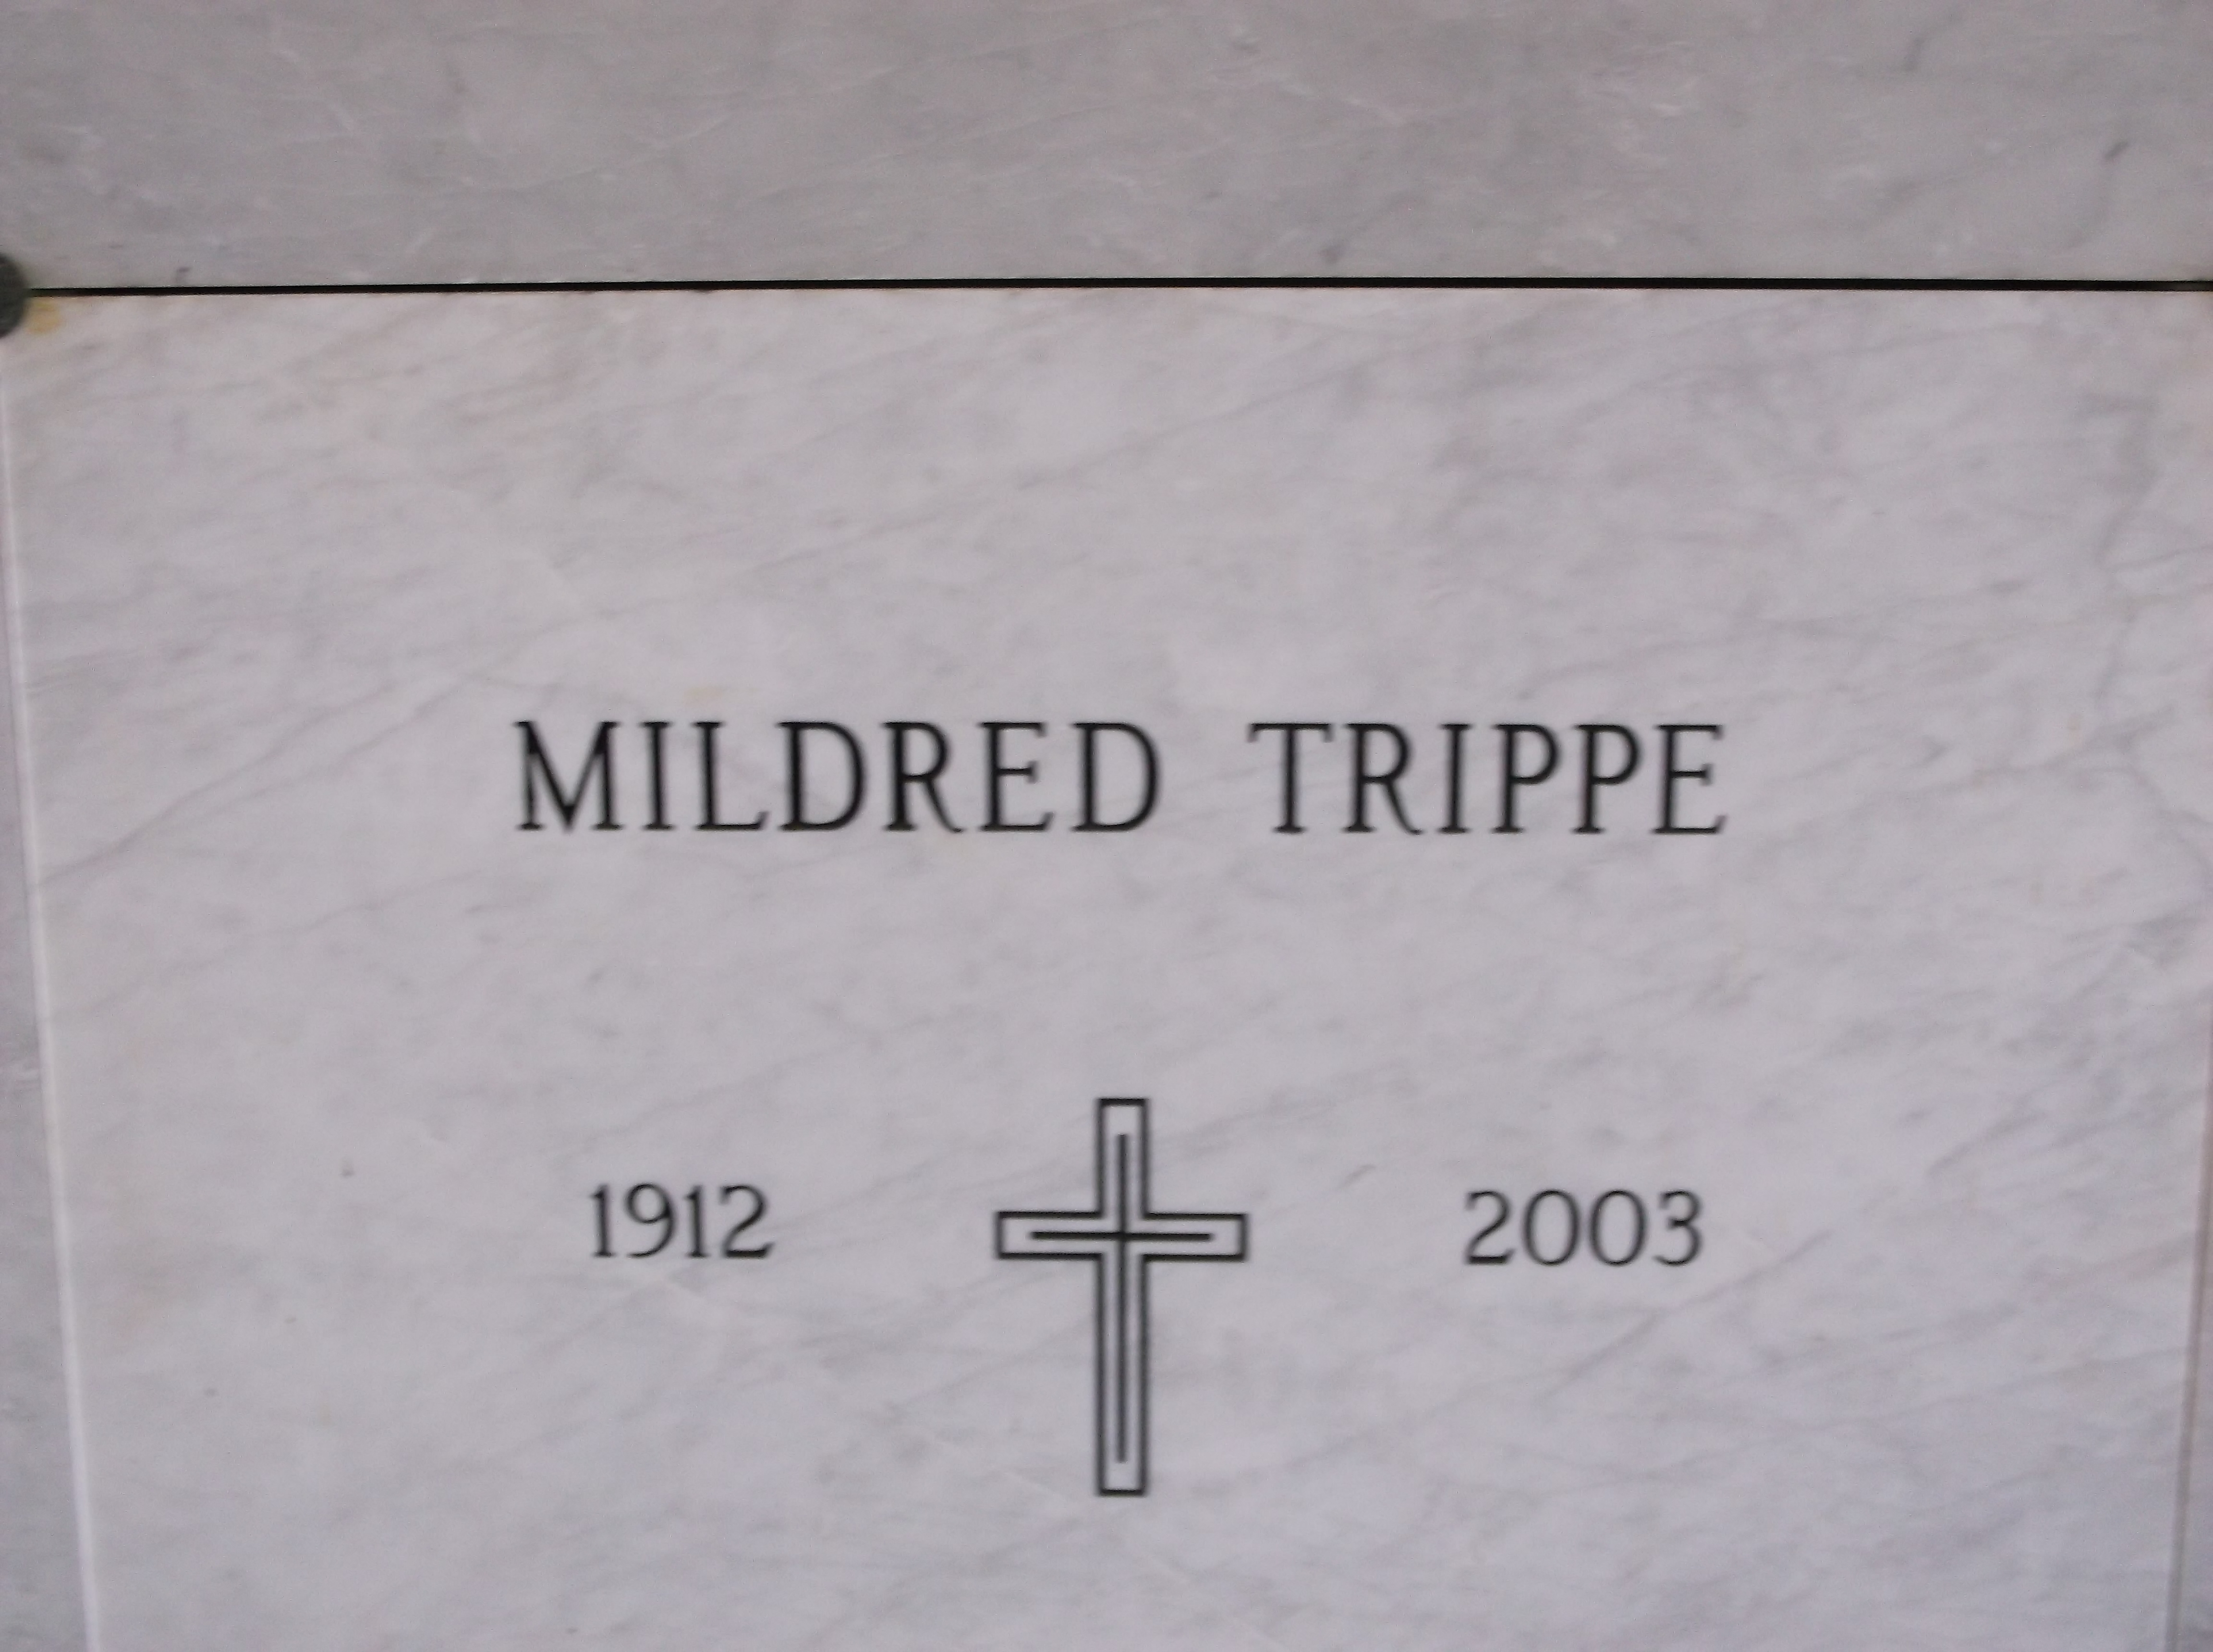 Mildred Trippe